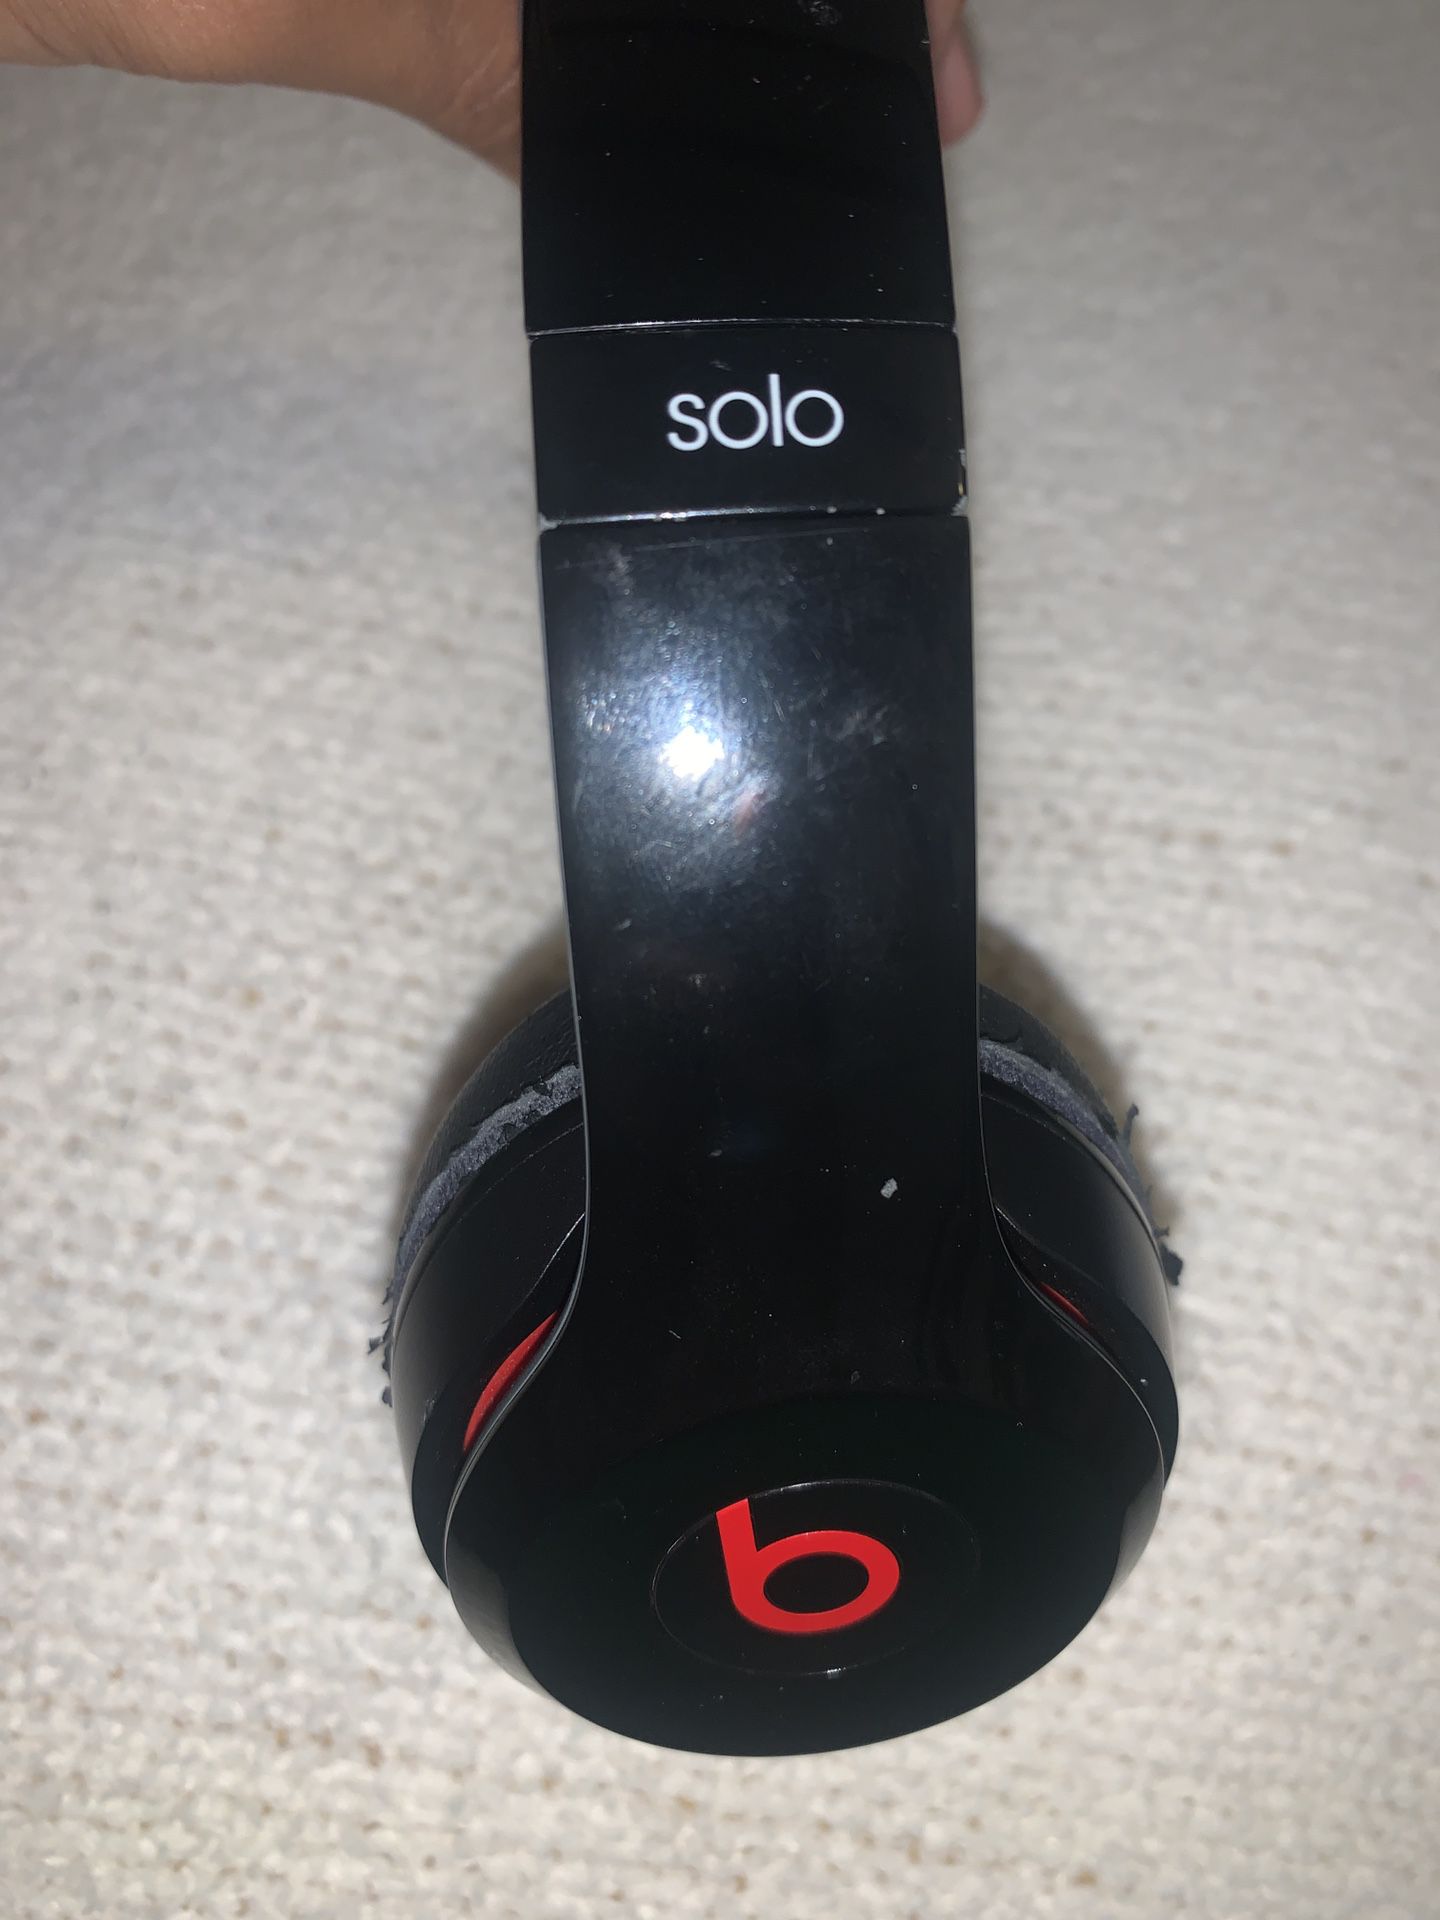 Beats solo 1 WIRED headphones (NO BLUETOOTH CAPABILITIES AT ALL)